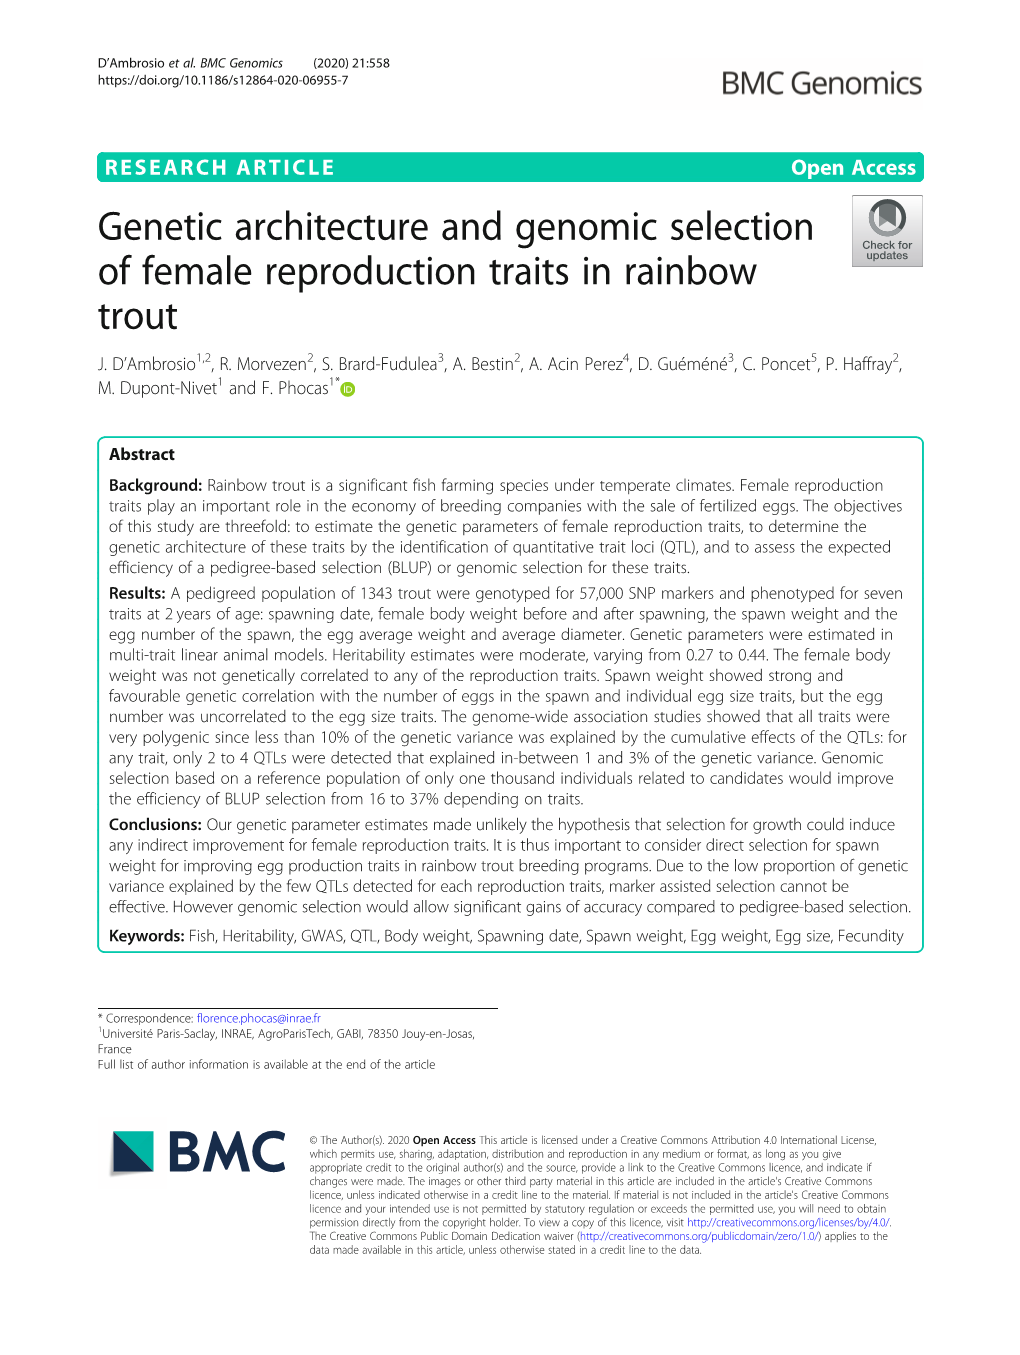 Genetic Architecture and Genomic Selection of Female Reproduction Traits in Rainbow Trout J